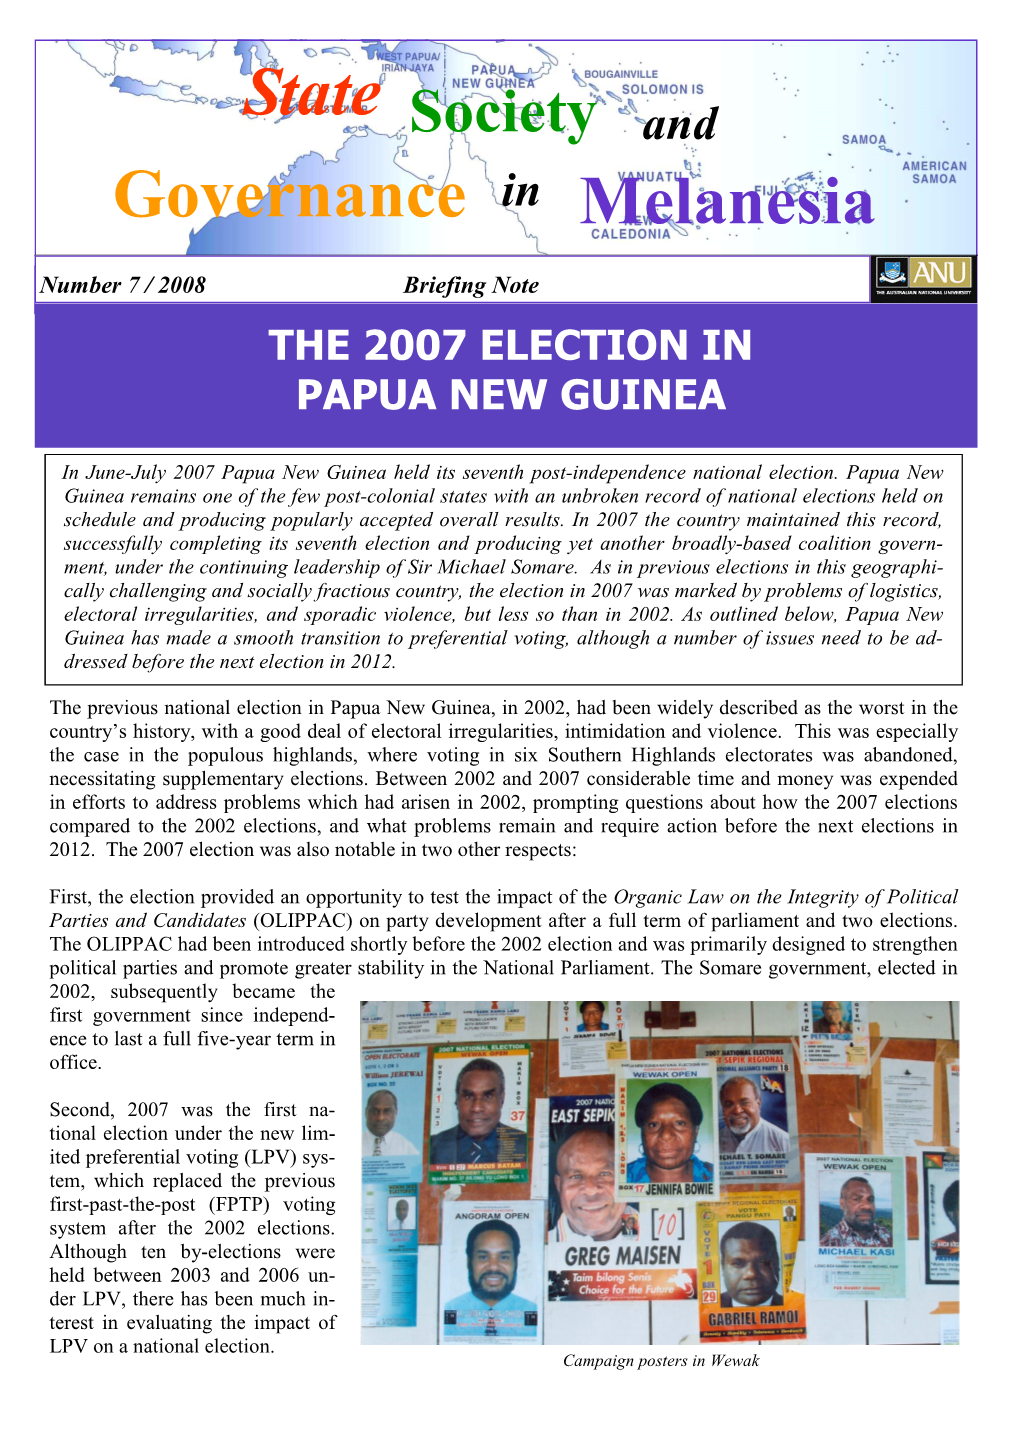 Briefing Note PNG Elections